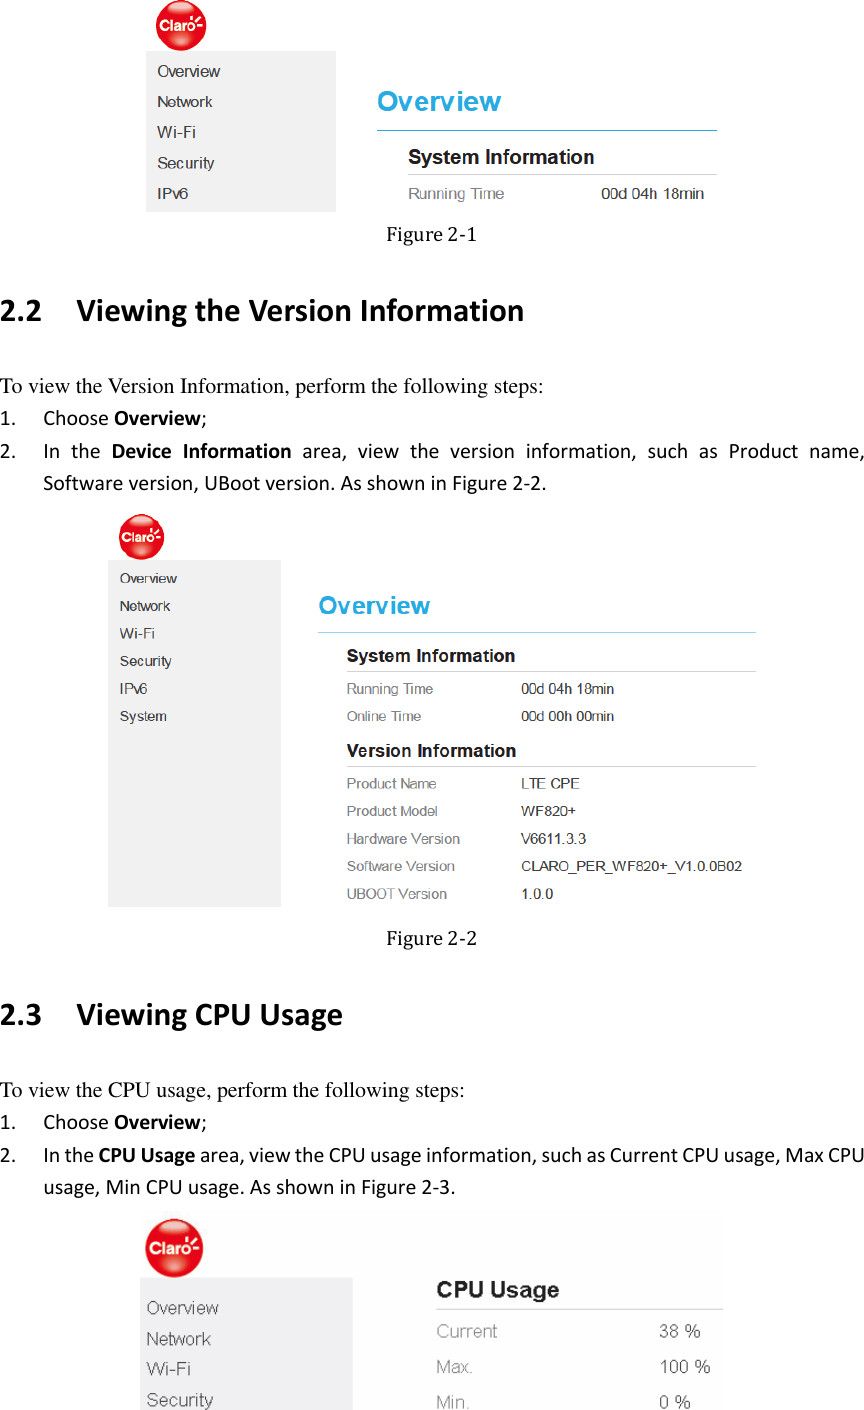    Figure 2-1 2.2   Viewing the Version Information To view the Version Information, perform the following steps: 1. Choose Overview; 2. In  the  Device  Information  area,  view  the  version  information,  such  as  Product  name, Software version, UBoot version. As shown in Figure 2-2.  Figure 2-2 2.3   Viewing CPU Usage To view the CPU usage, perform the following steps: 1. Choose Overview; 2. In the CPU Usage area, view the CPU usage information, such as Current CPU usage, Max CPU usage, Min CPU usage. As shown in Figure 2-3.  